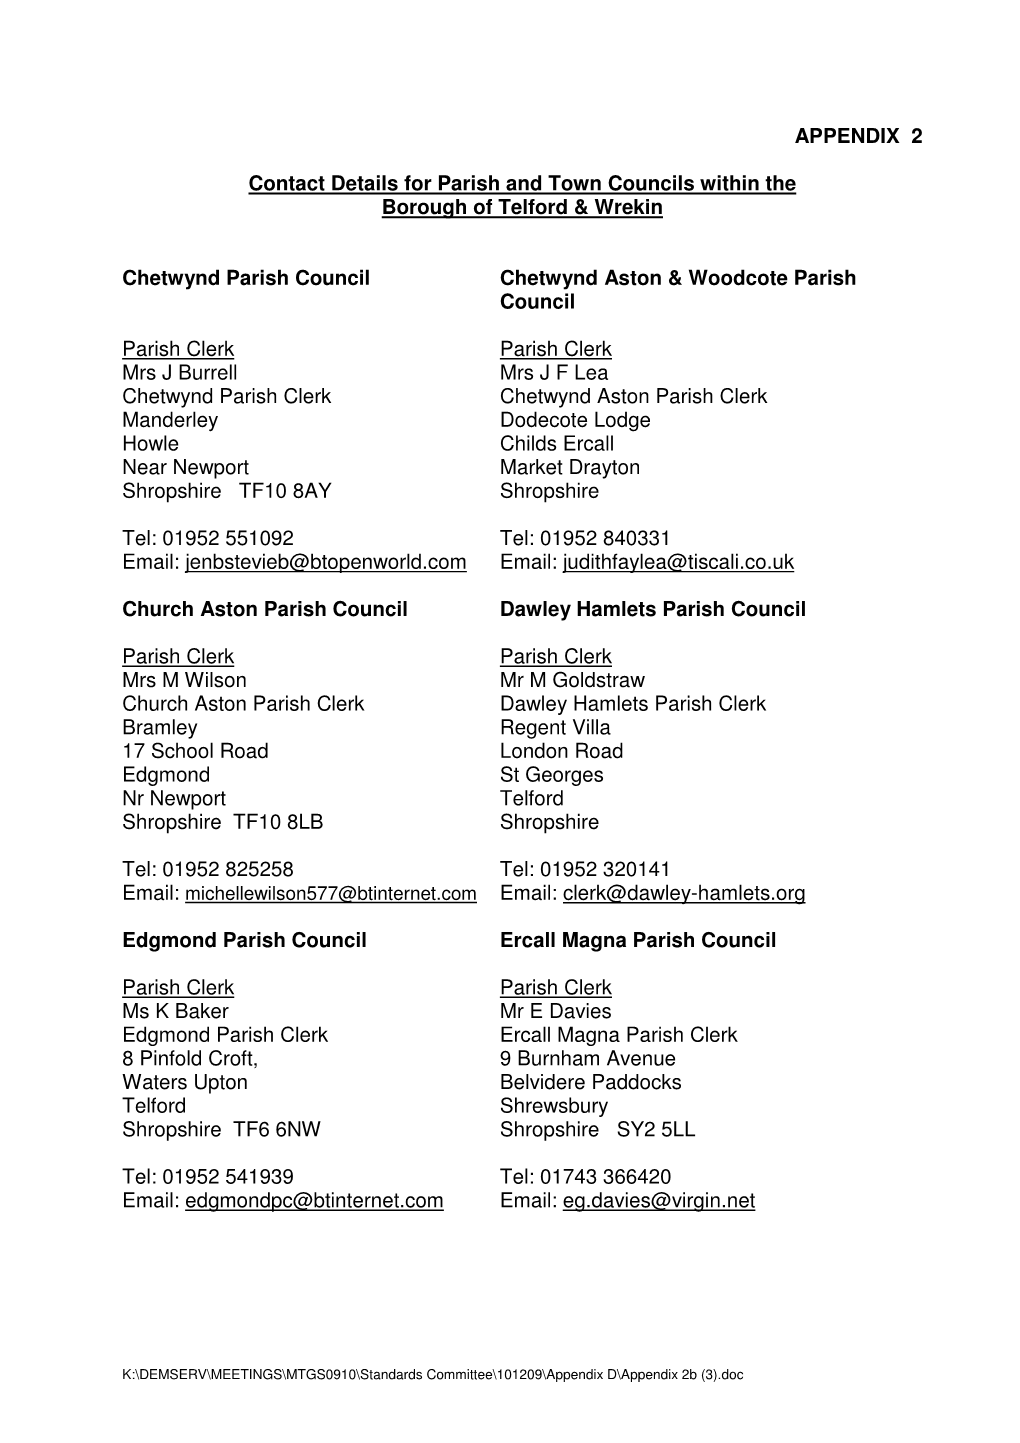 APPENDIX 2 Contact Details for Parish and Town Councils Within